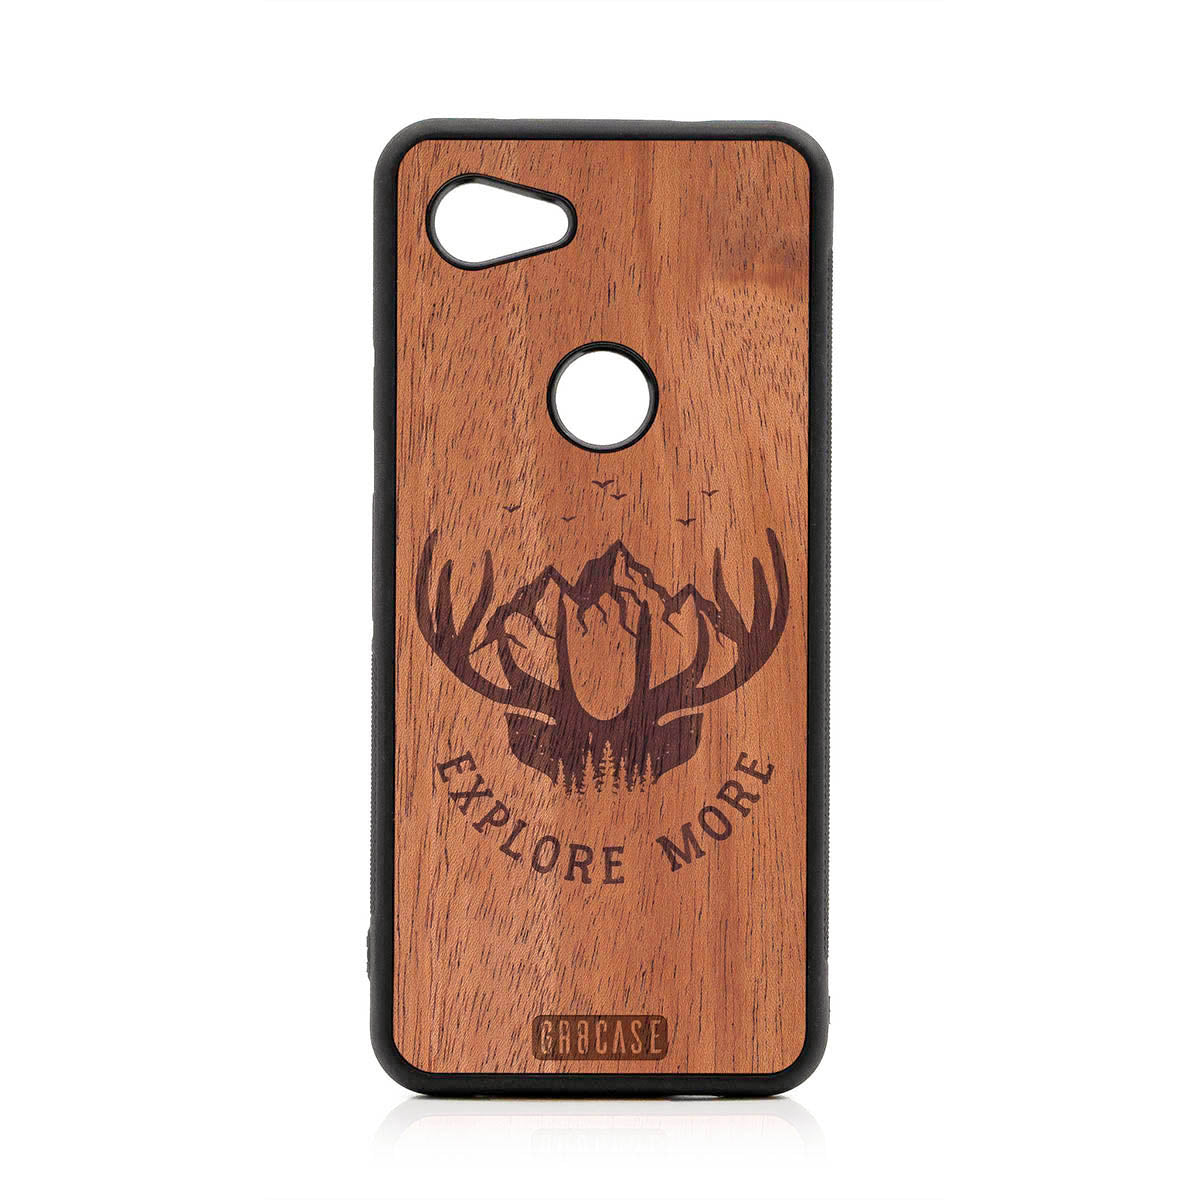 Explore More (Forest, Mountains & Antlers) Design Wood Case For Google Pixel 3A XL by GR8CASE